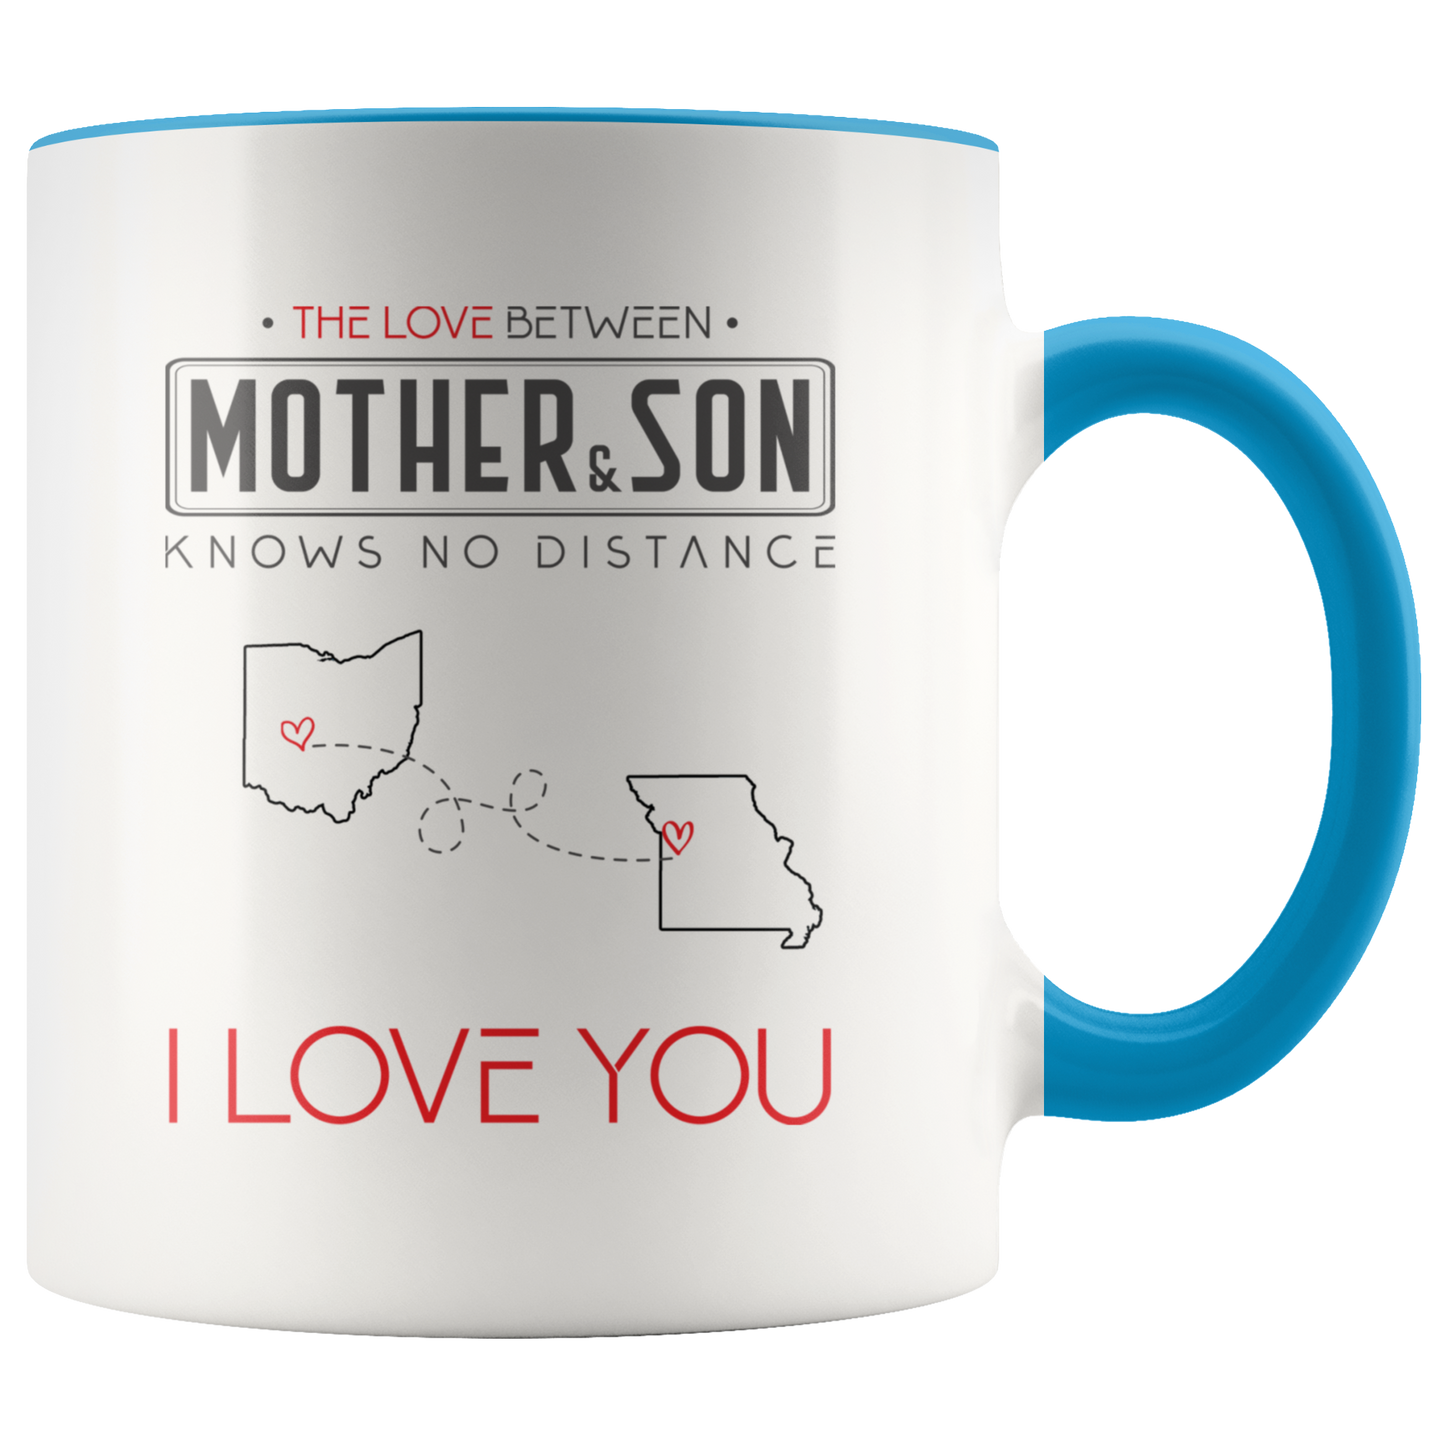 ND-21315656-sp-23390 - Mom And Son Accent Mug 11 oz Red - The Love Between Mother A